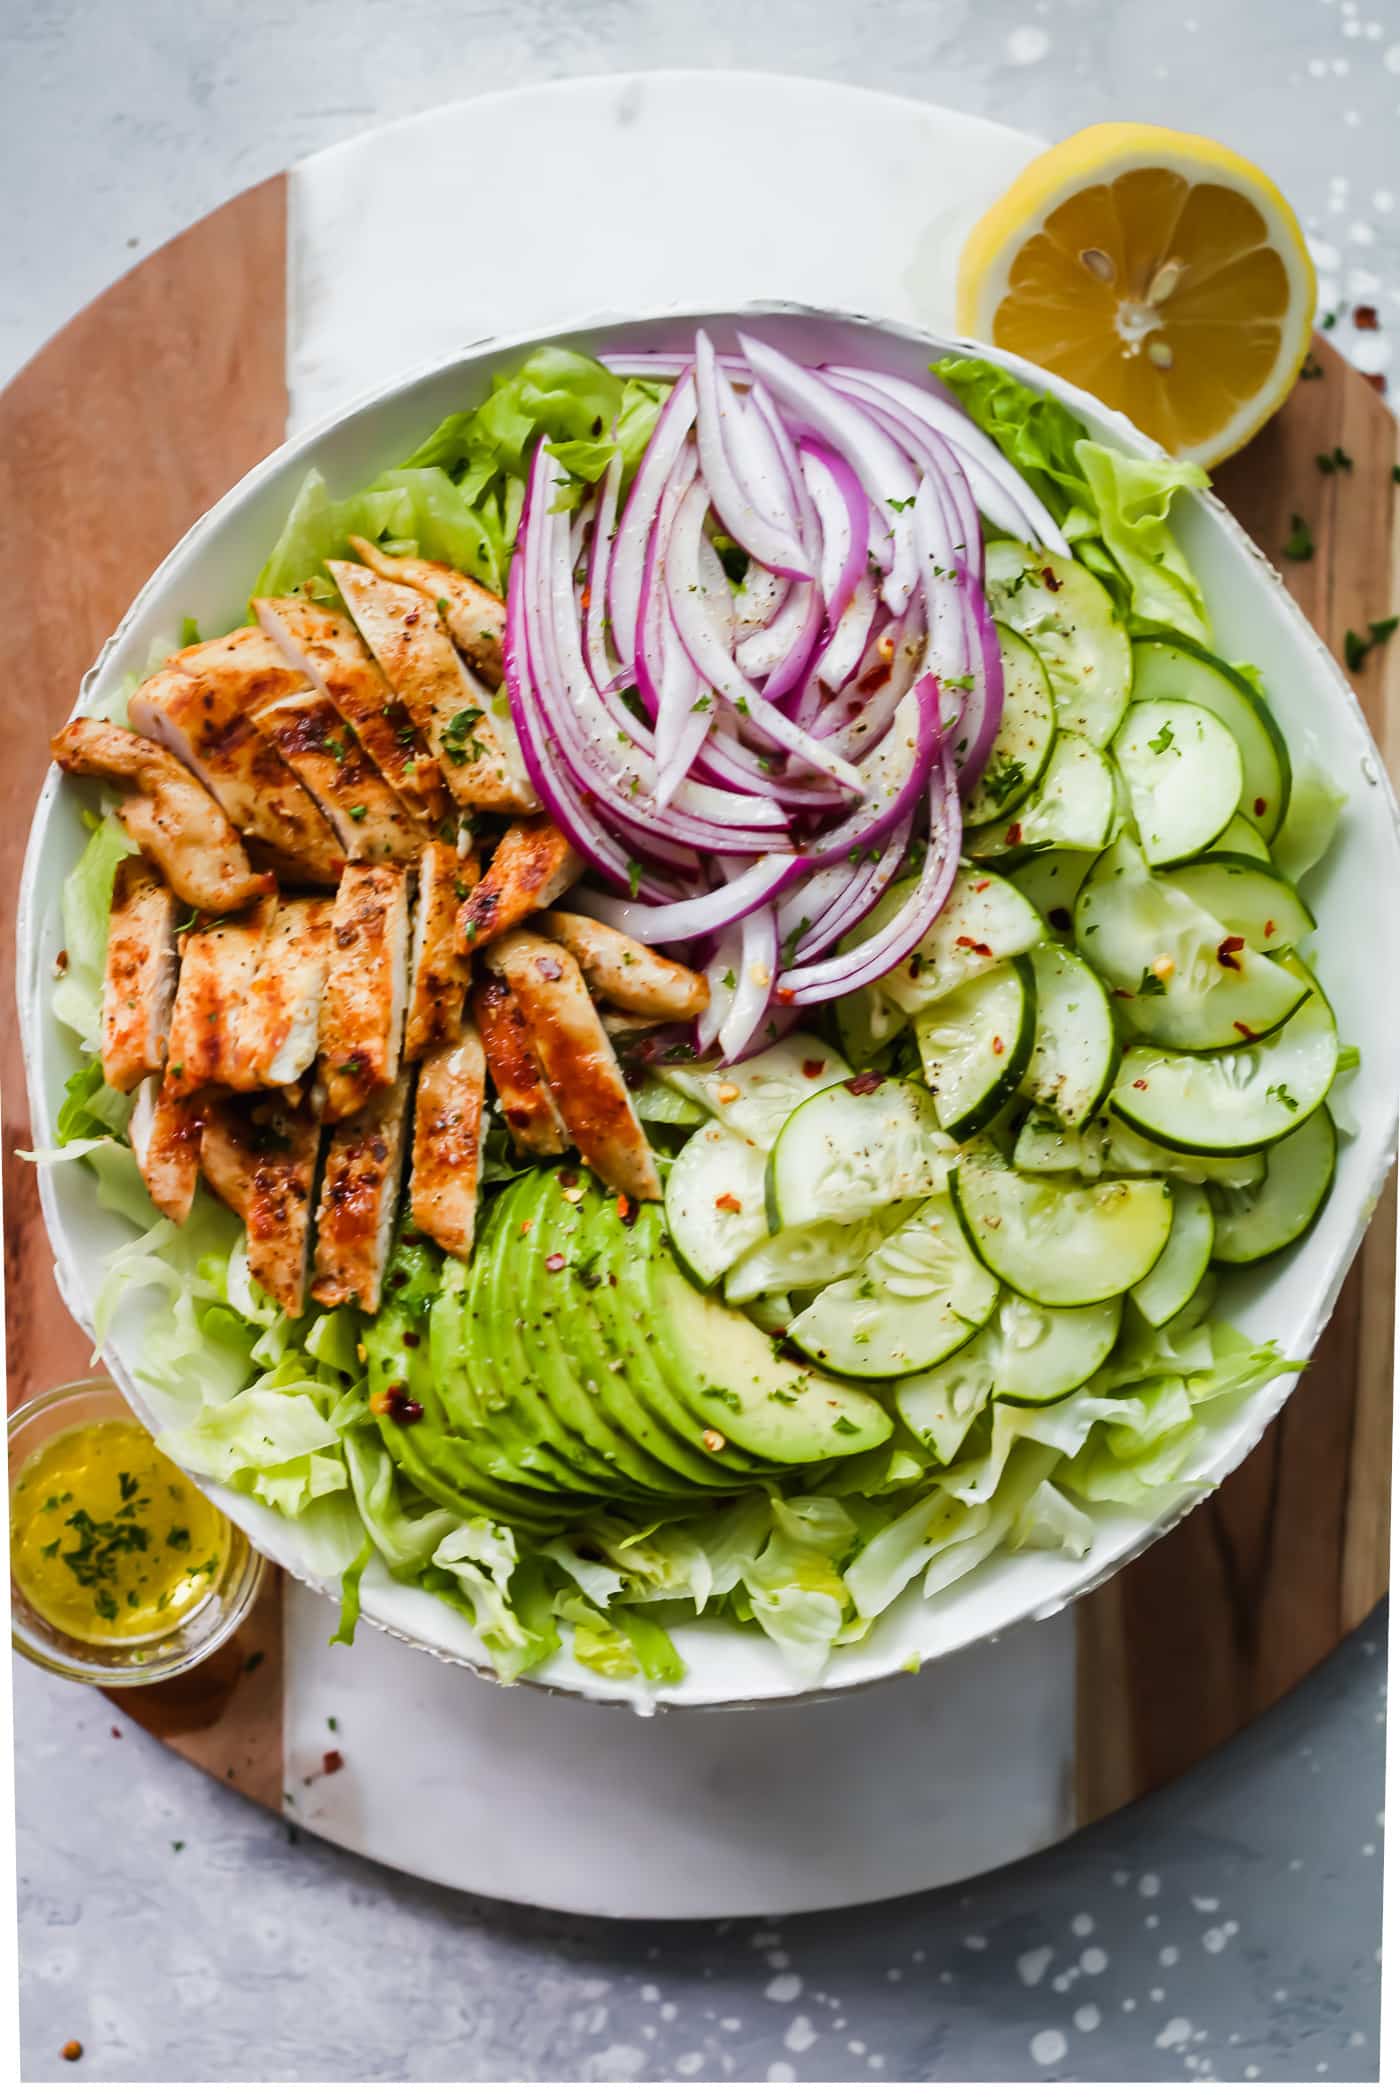 30 Keto Dinner Ideas You can make in 30 minutes